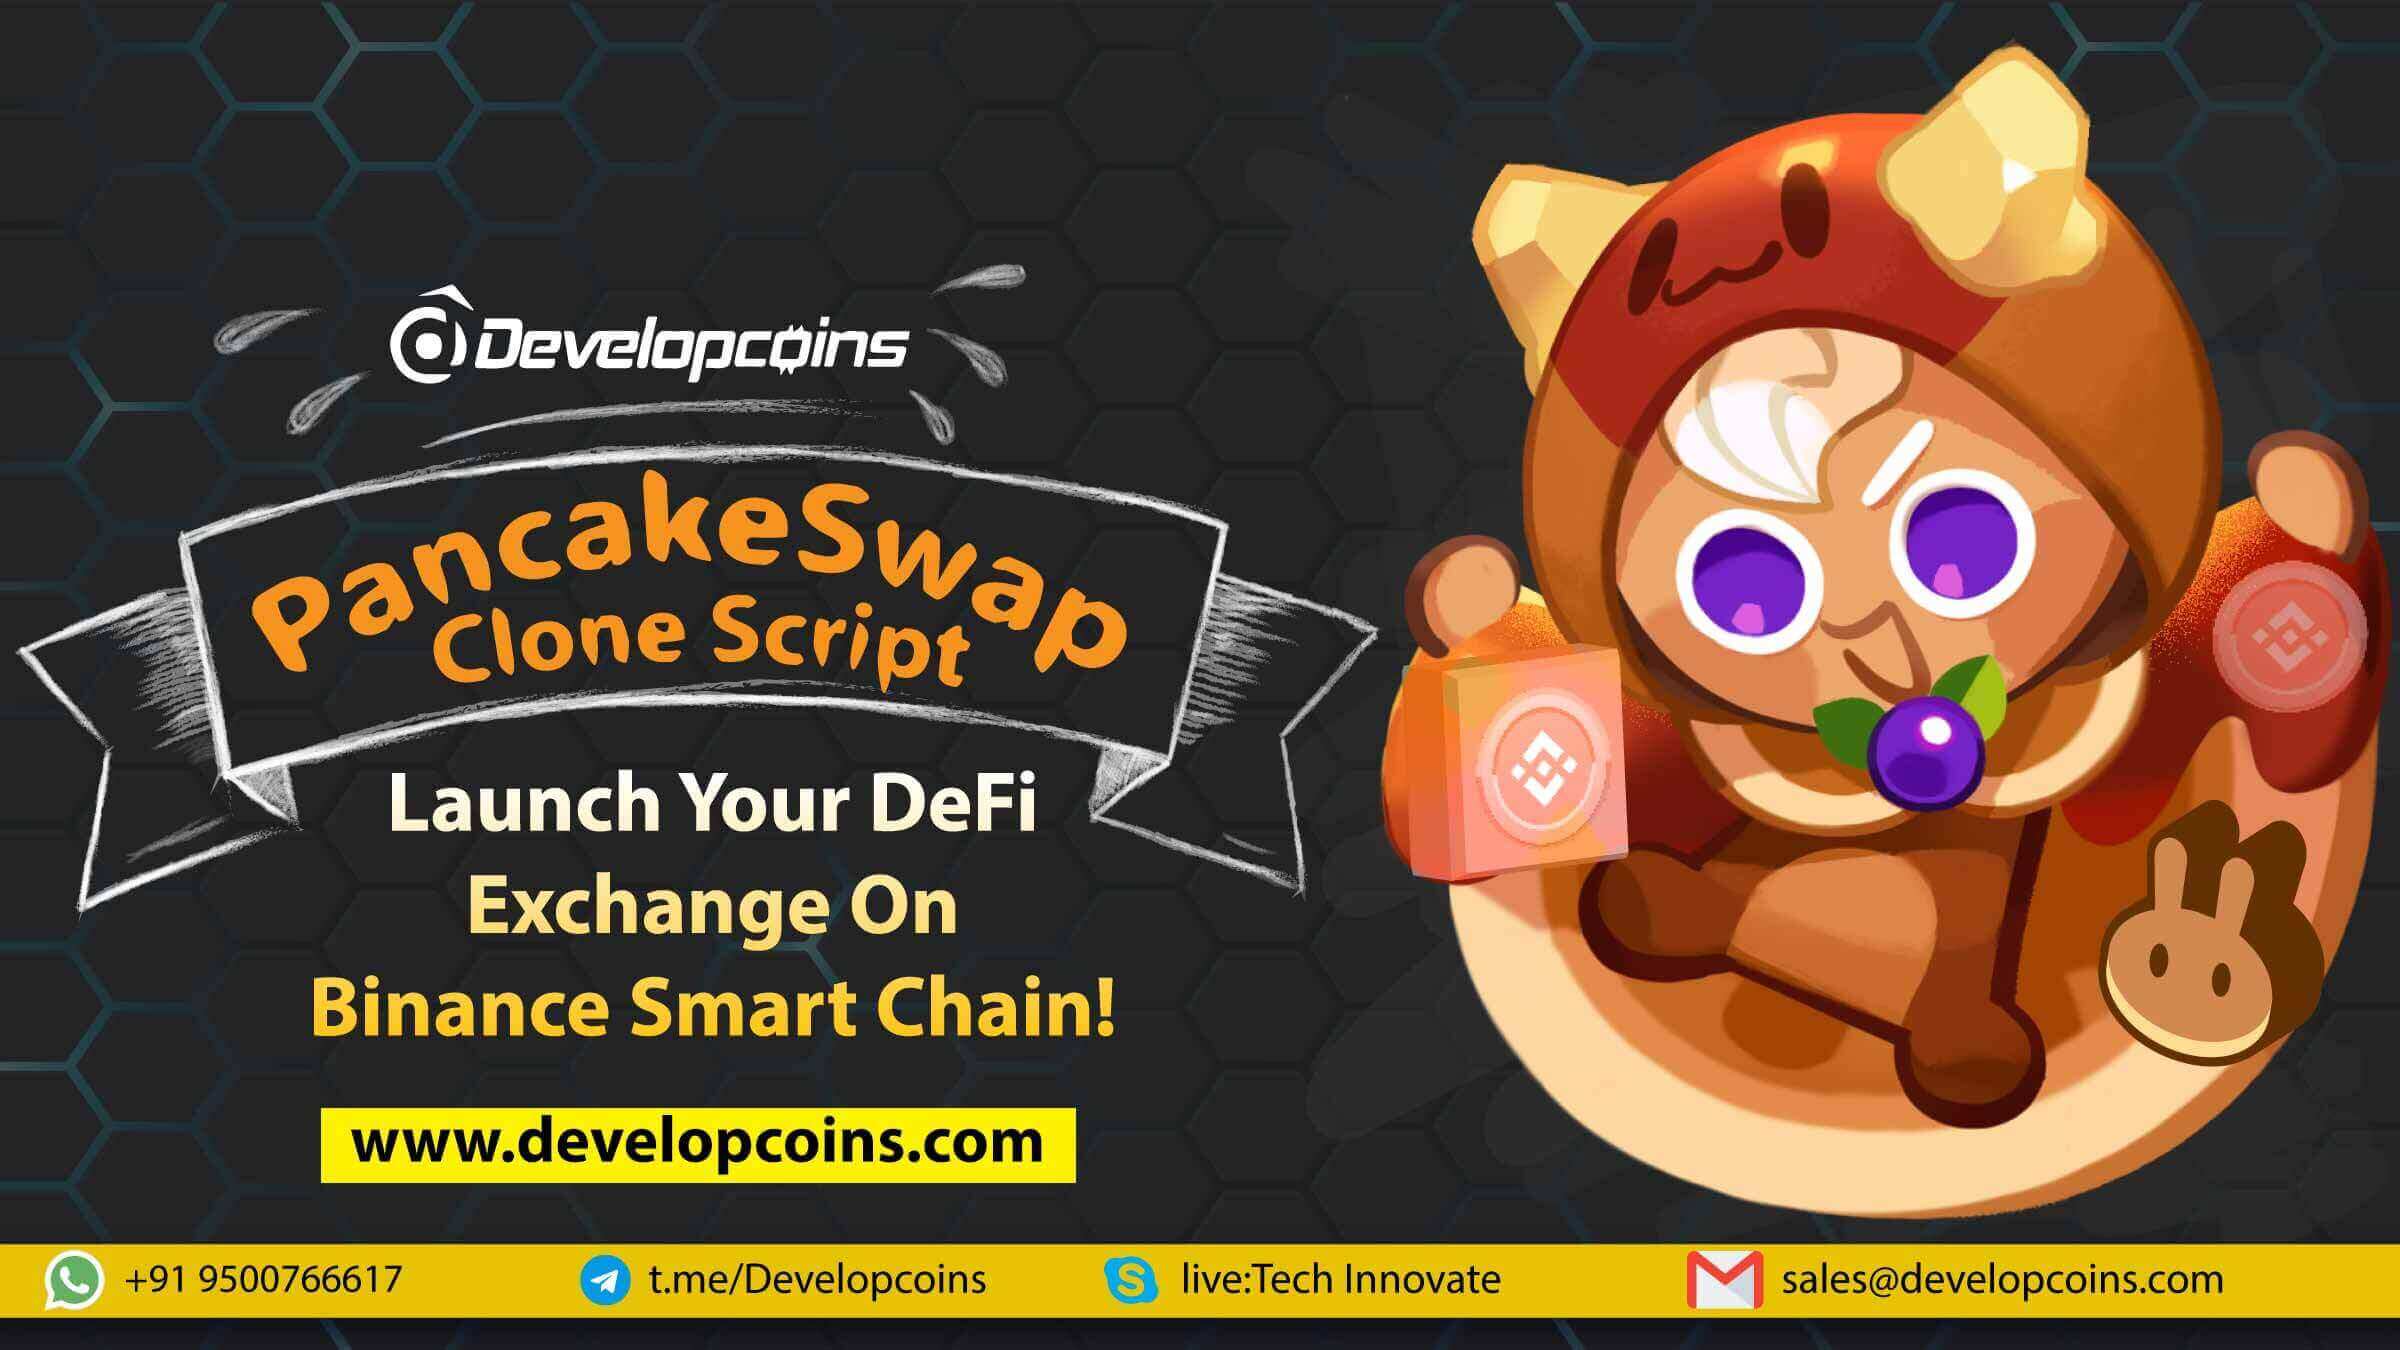 Launch Your Own Decentralized Exchange Like PancakeSwap On Binance Smart Chain